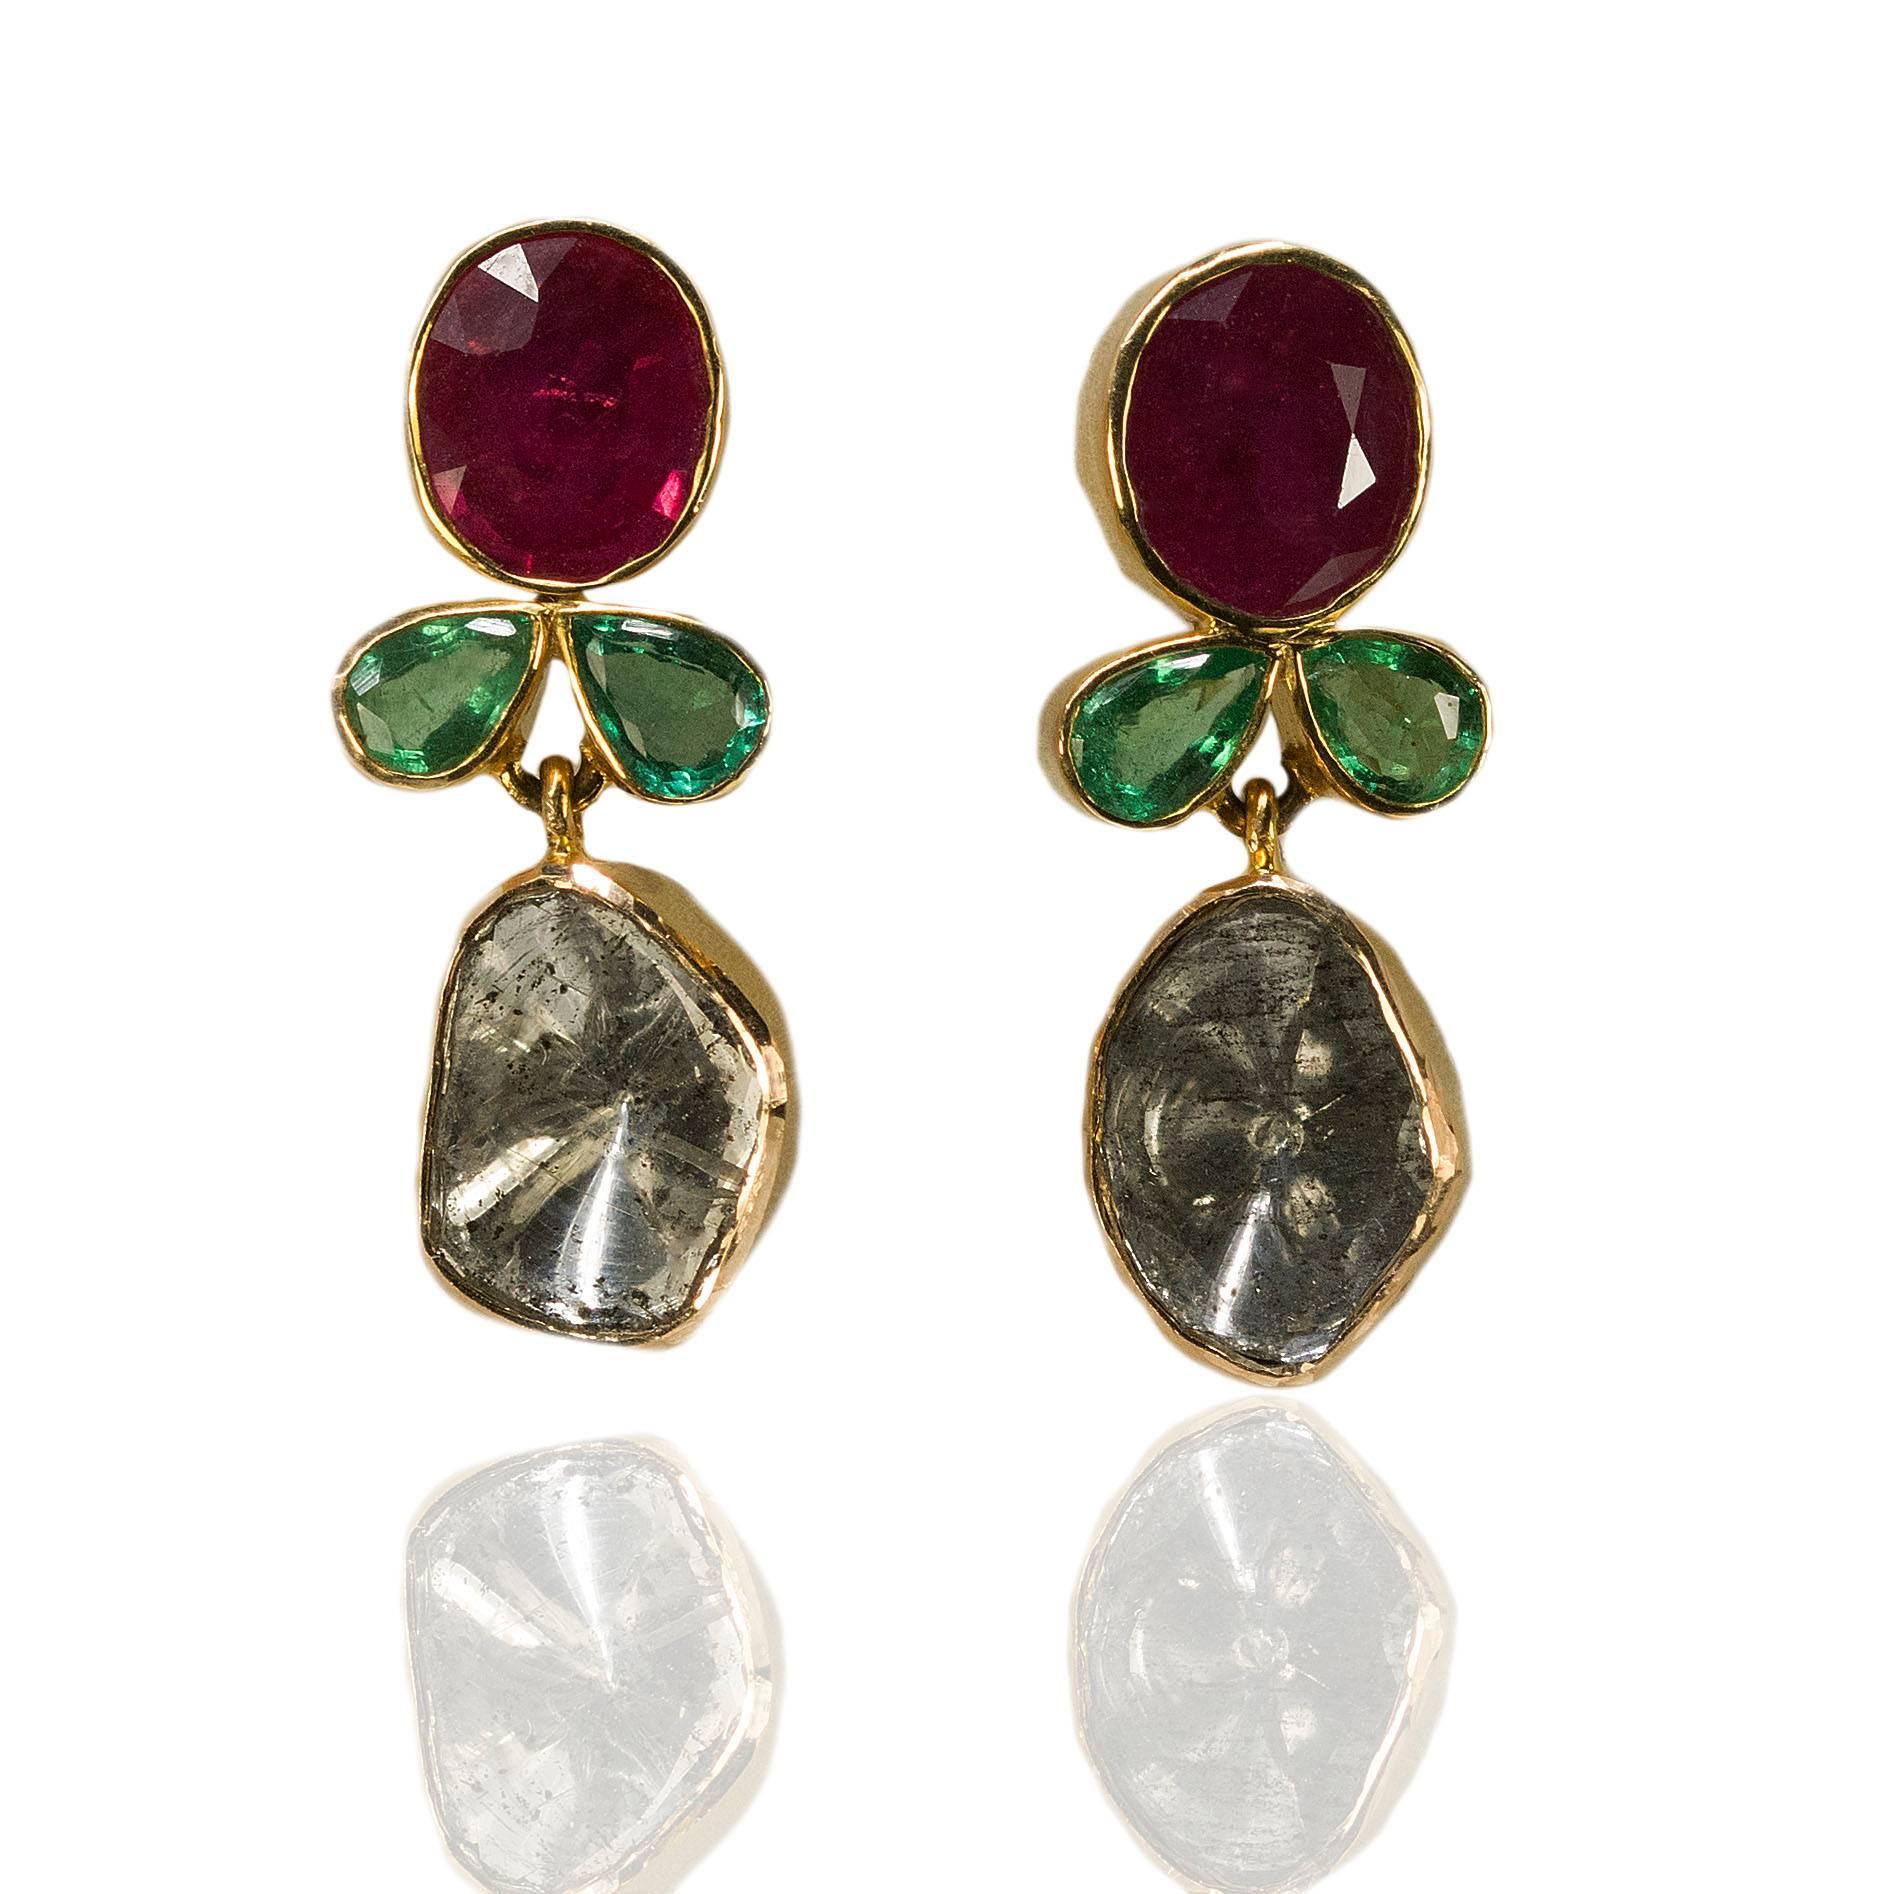 18k Fancy Earrings with 2 oval rubies weighing approximately 3.50 carats, 2 buff top, foil back diamonds weighing approximately 2.00 carats, 4 pear shape emeralds weighing approximately 1.20 carats, 5.89g